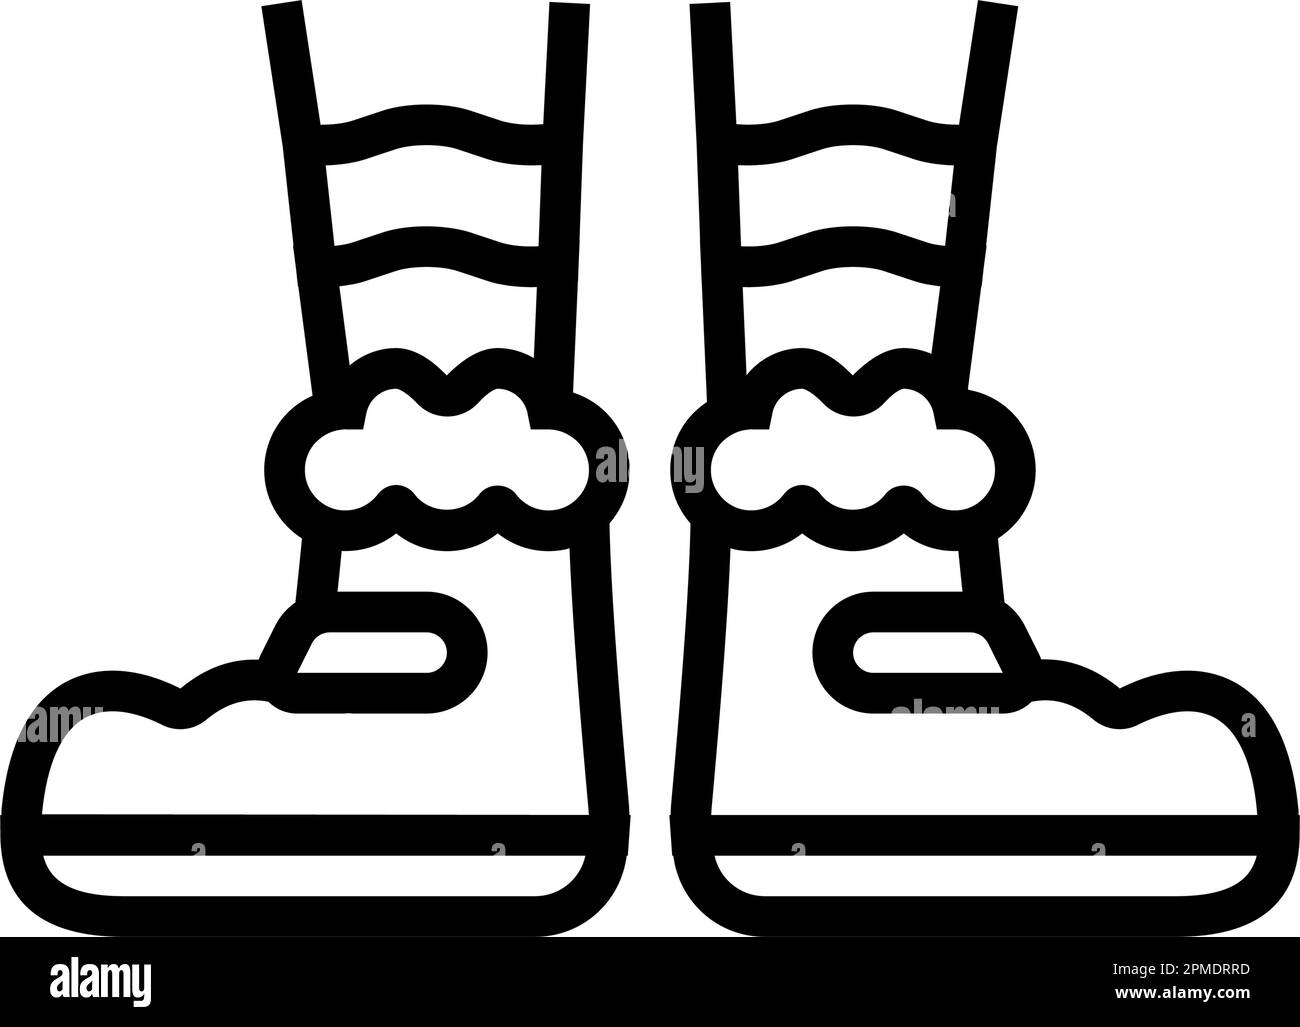 Elf shoes Black and White Stock Photos & Images - Alamy